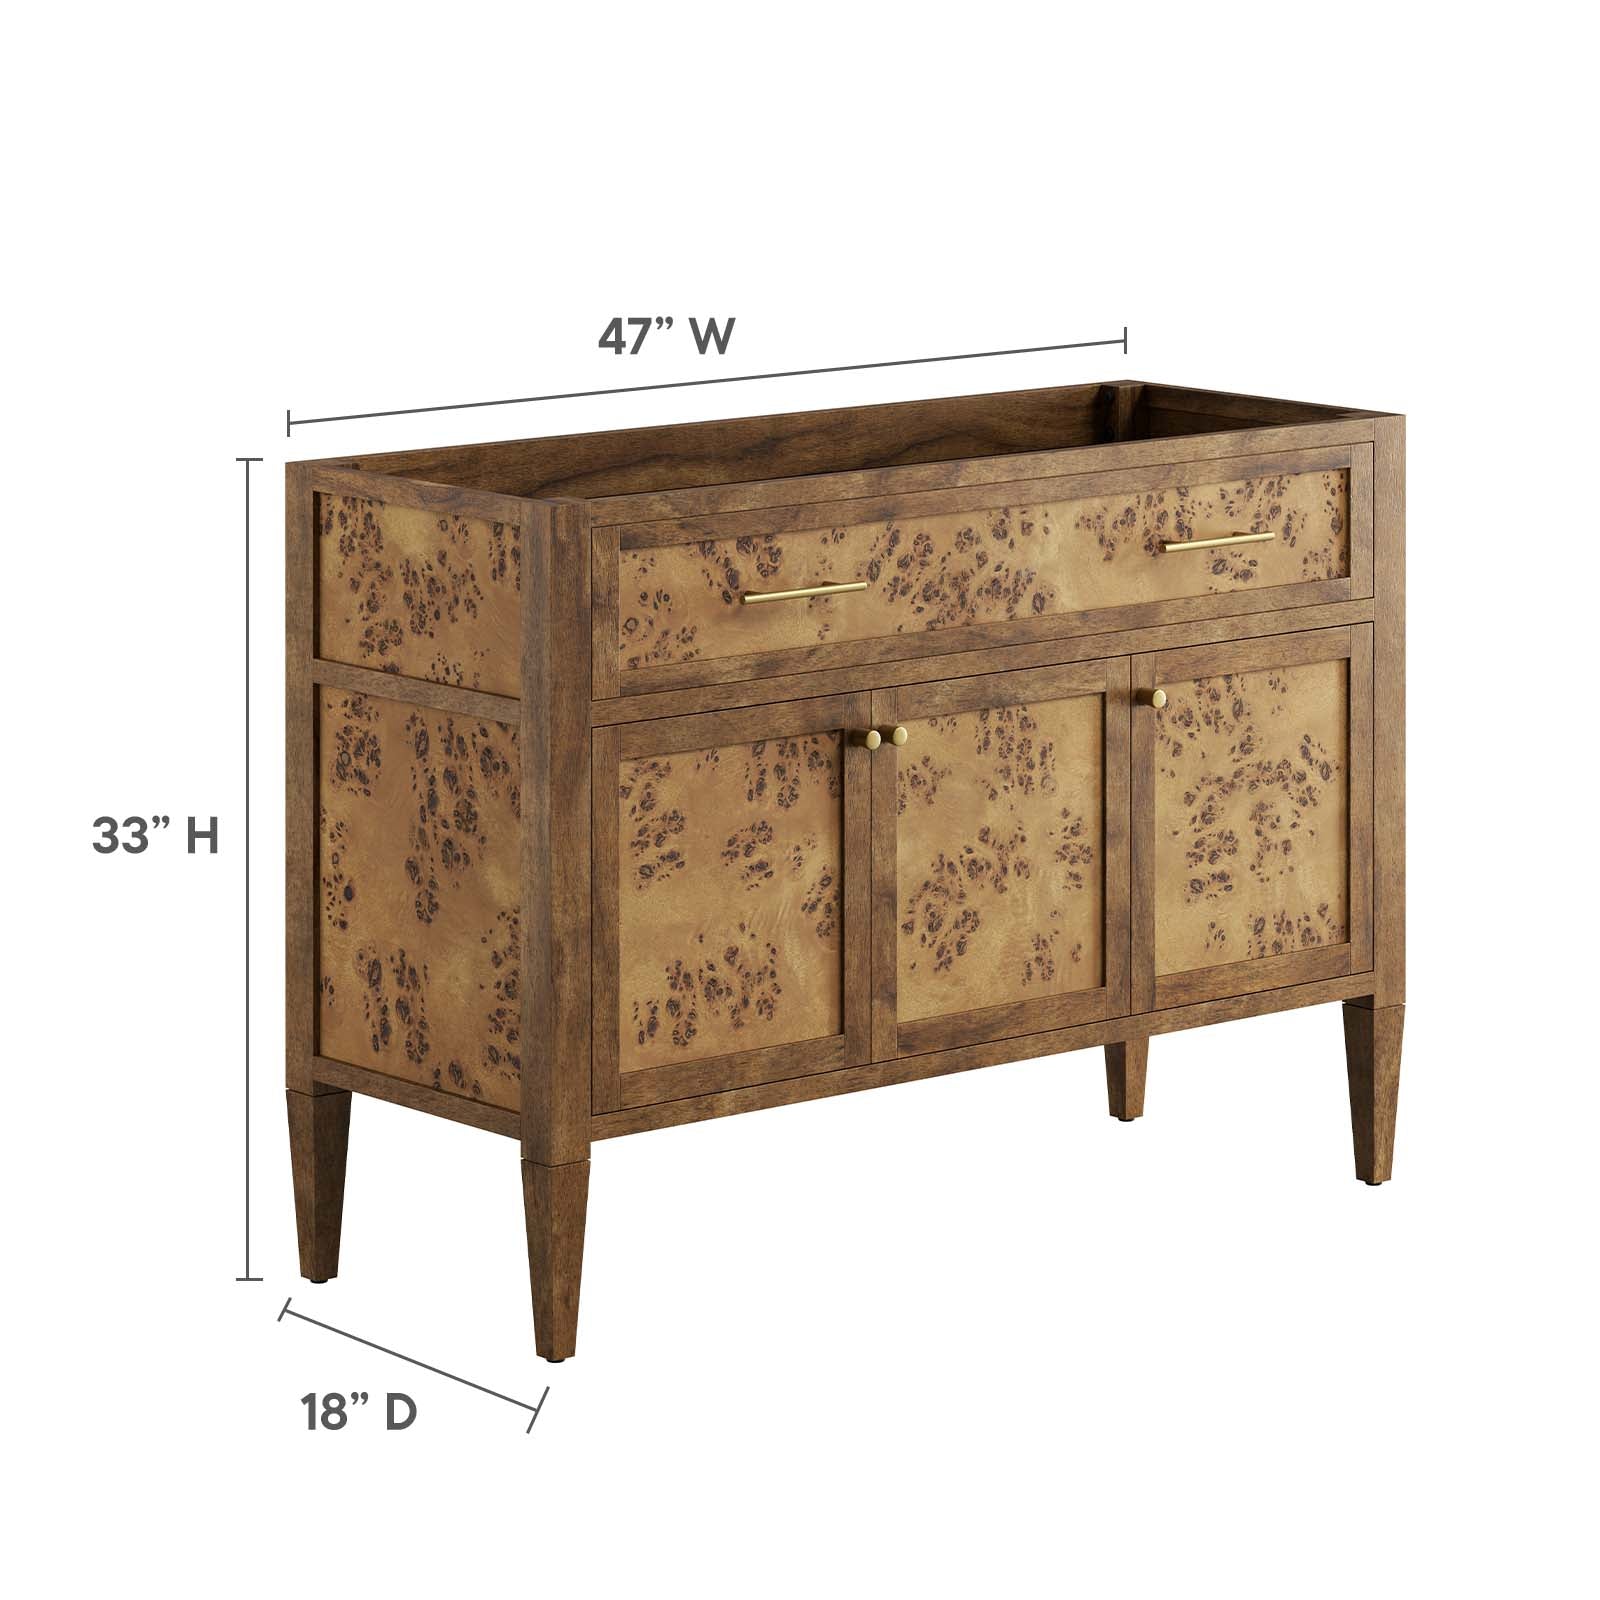 Elysian 48" Wood Bathroom Vanity Cabinet (Sink Basin Not Included) By Modway - EEI-6140 | Bathroom Accessories | Modway - 8